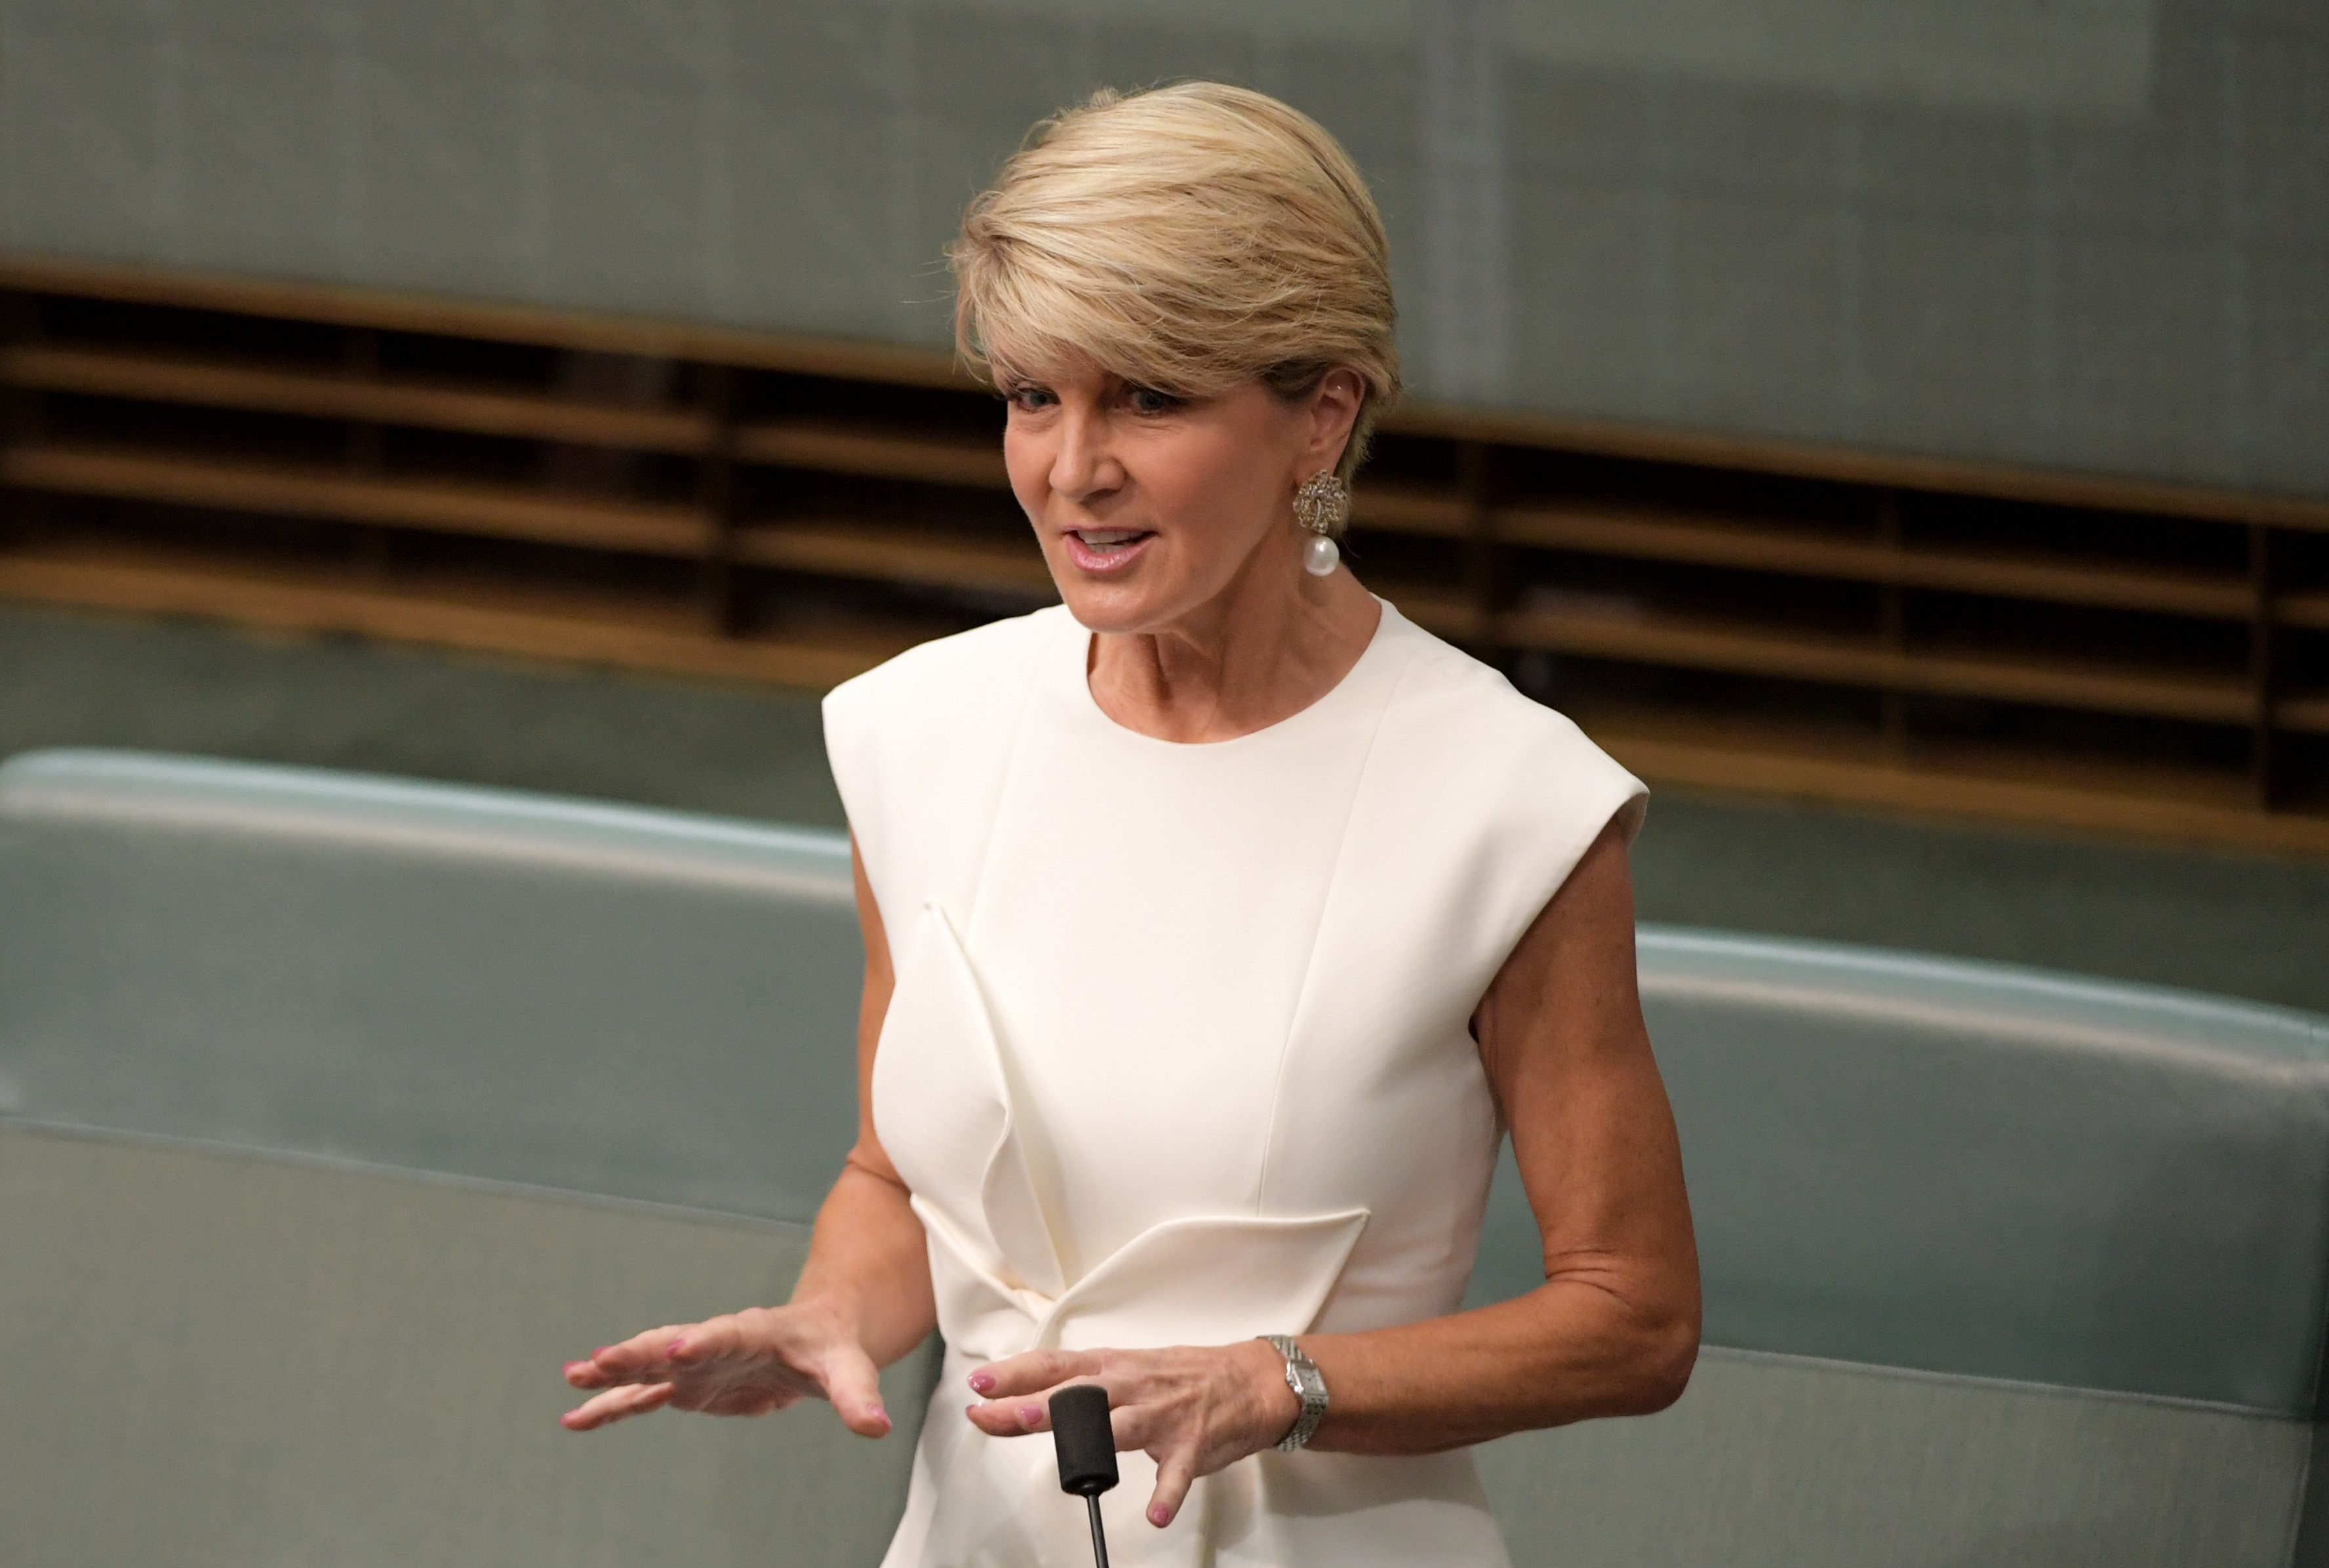 Former foreign minister of Australia Julie Bishop at the Parliament House | Photo: Getty Images